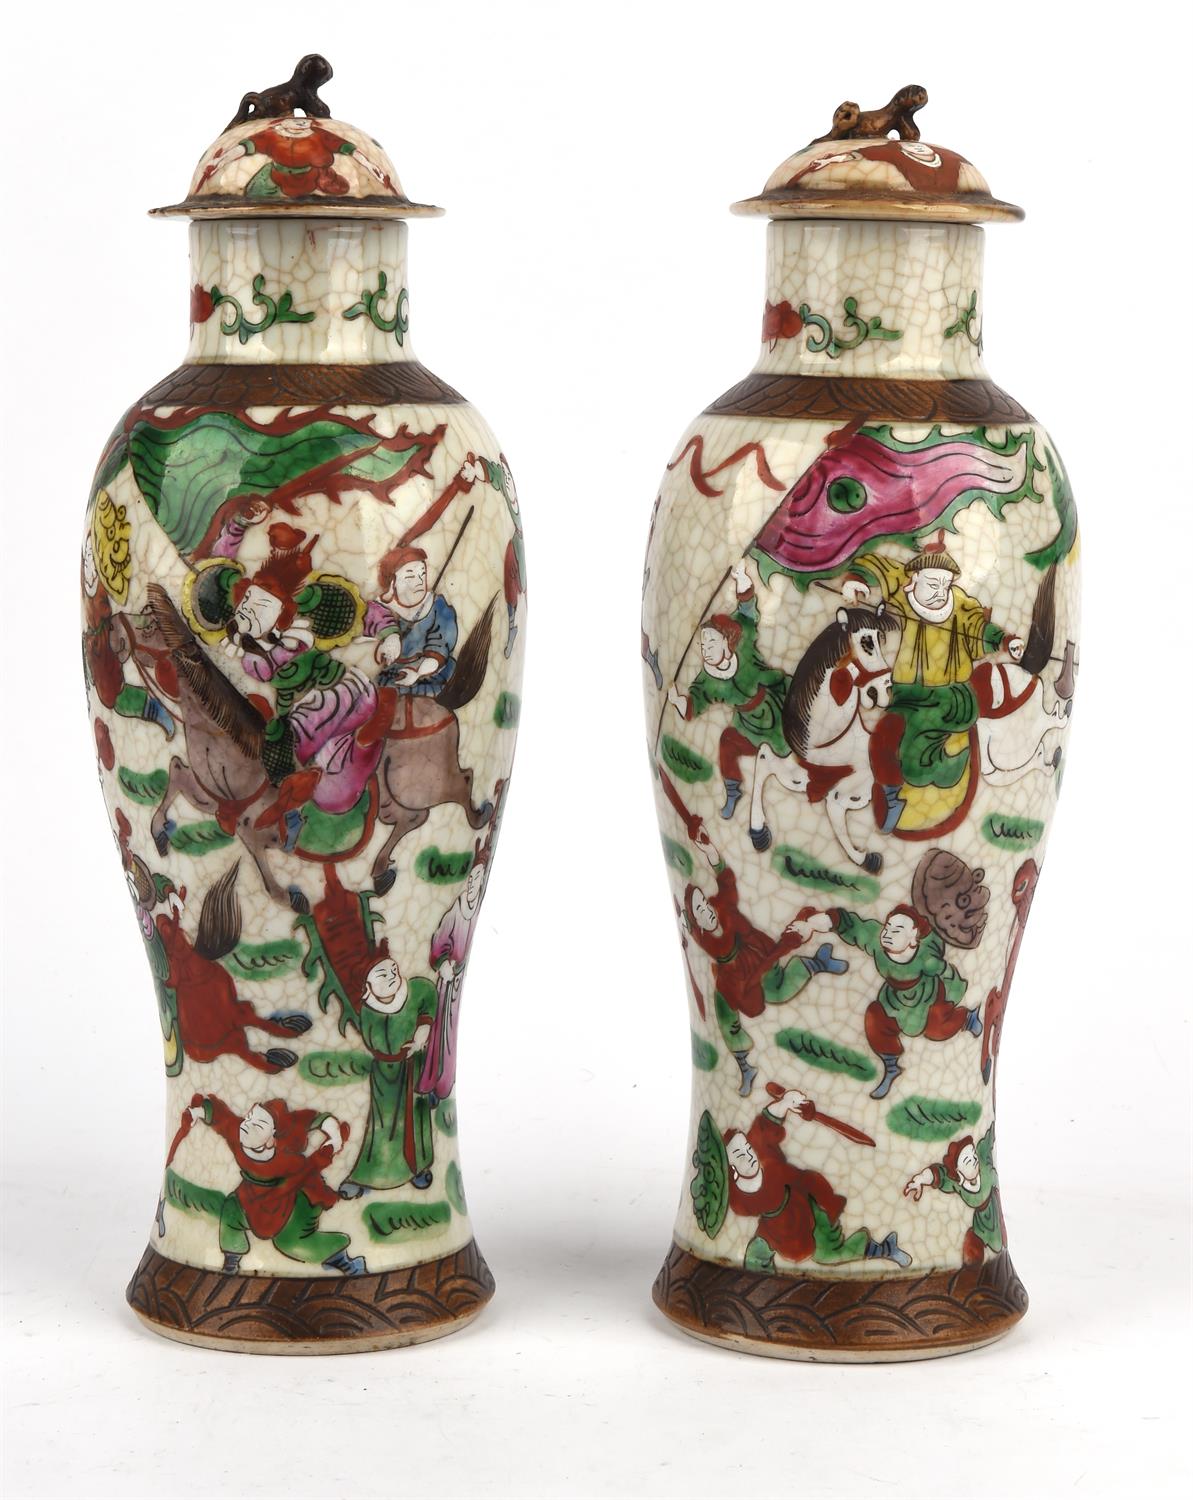 A Pair of famille rose vases and covers, late Qing Dynasty or later, decorated with friezes of